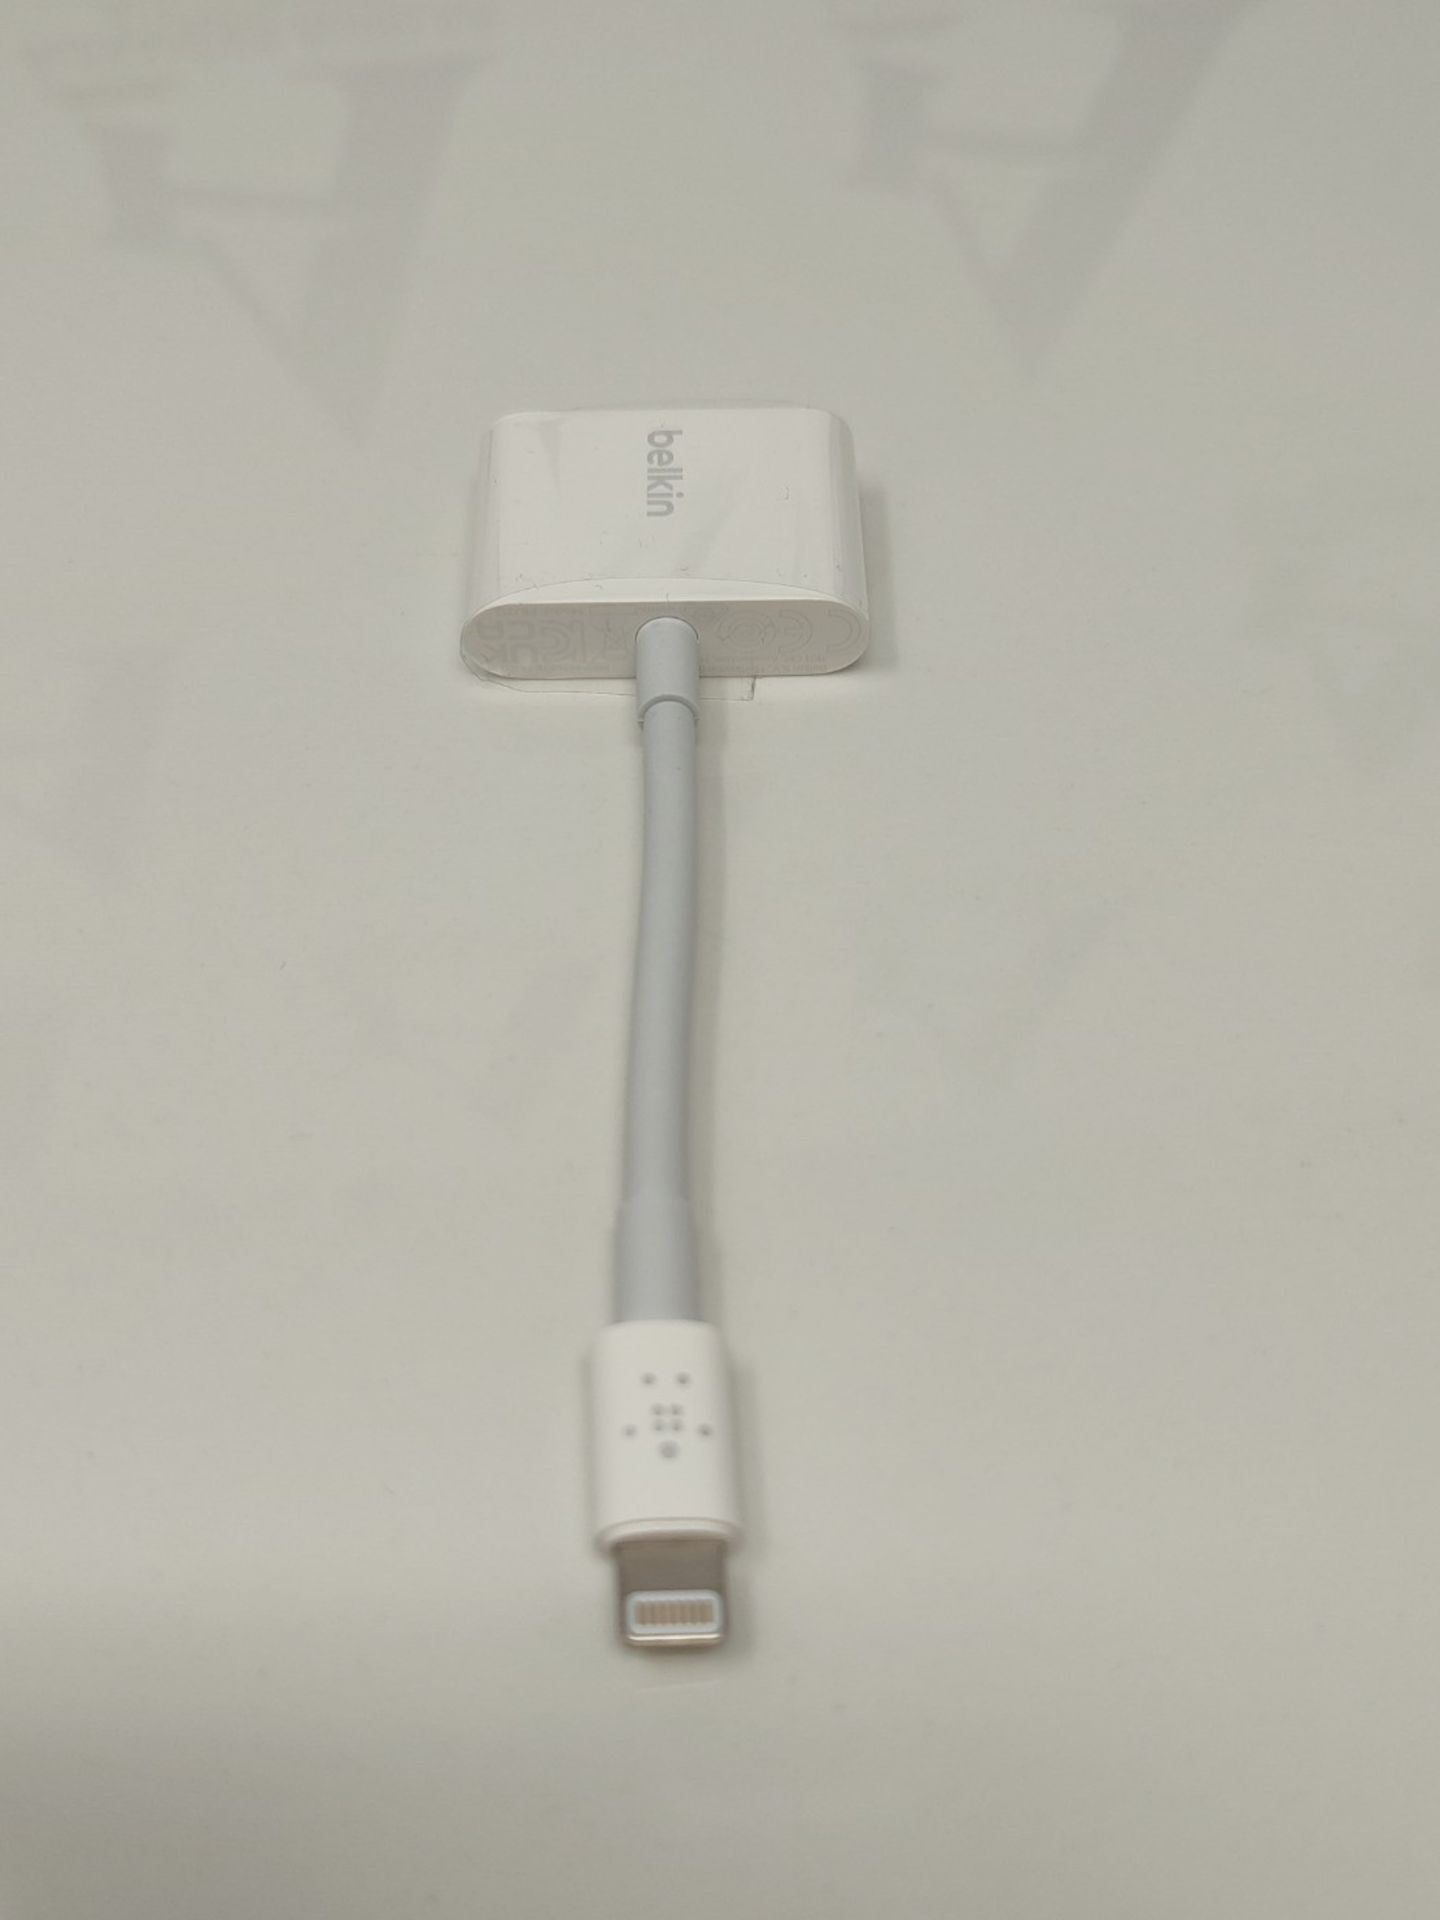 Belkin 3.5 mm Audio + Charge Rockstar (iPhone Aux Adapter/iPhone Charging Adapter), Wh - Image 3 of 3